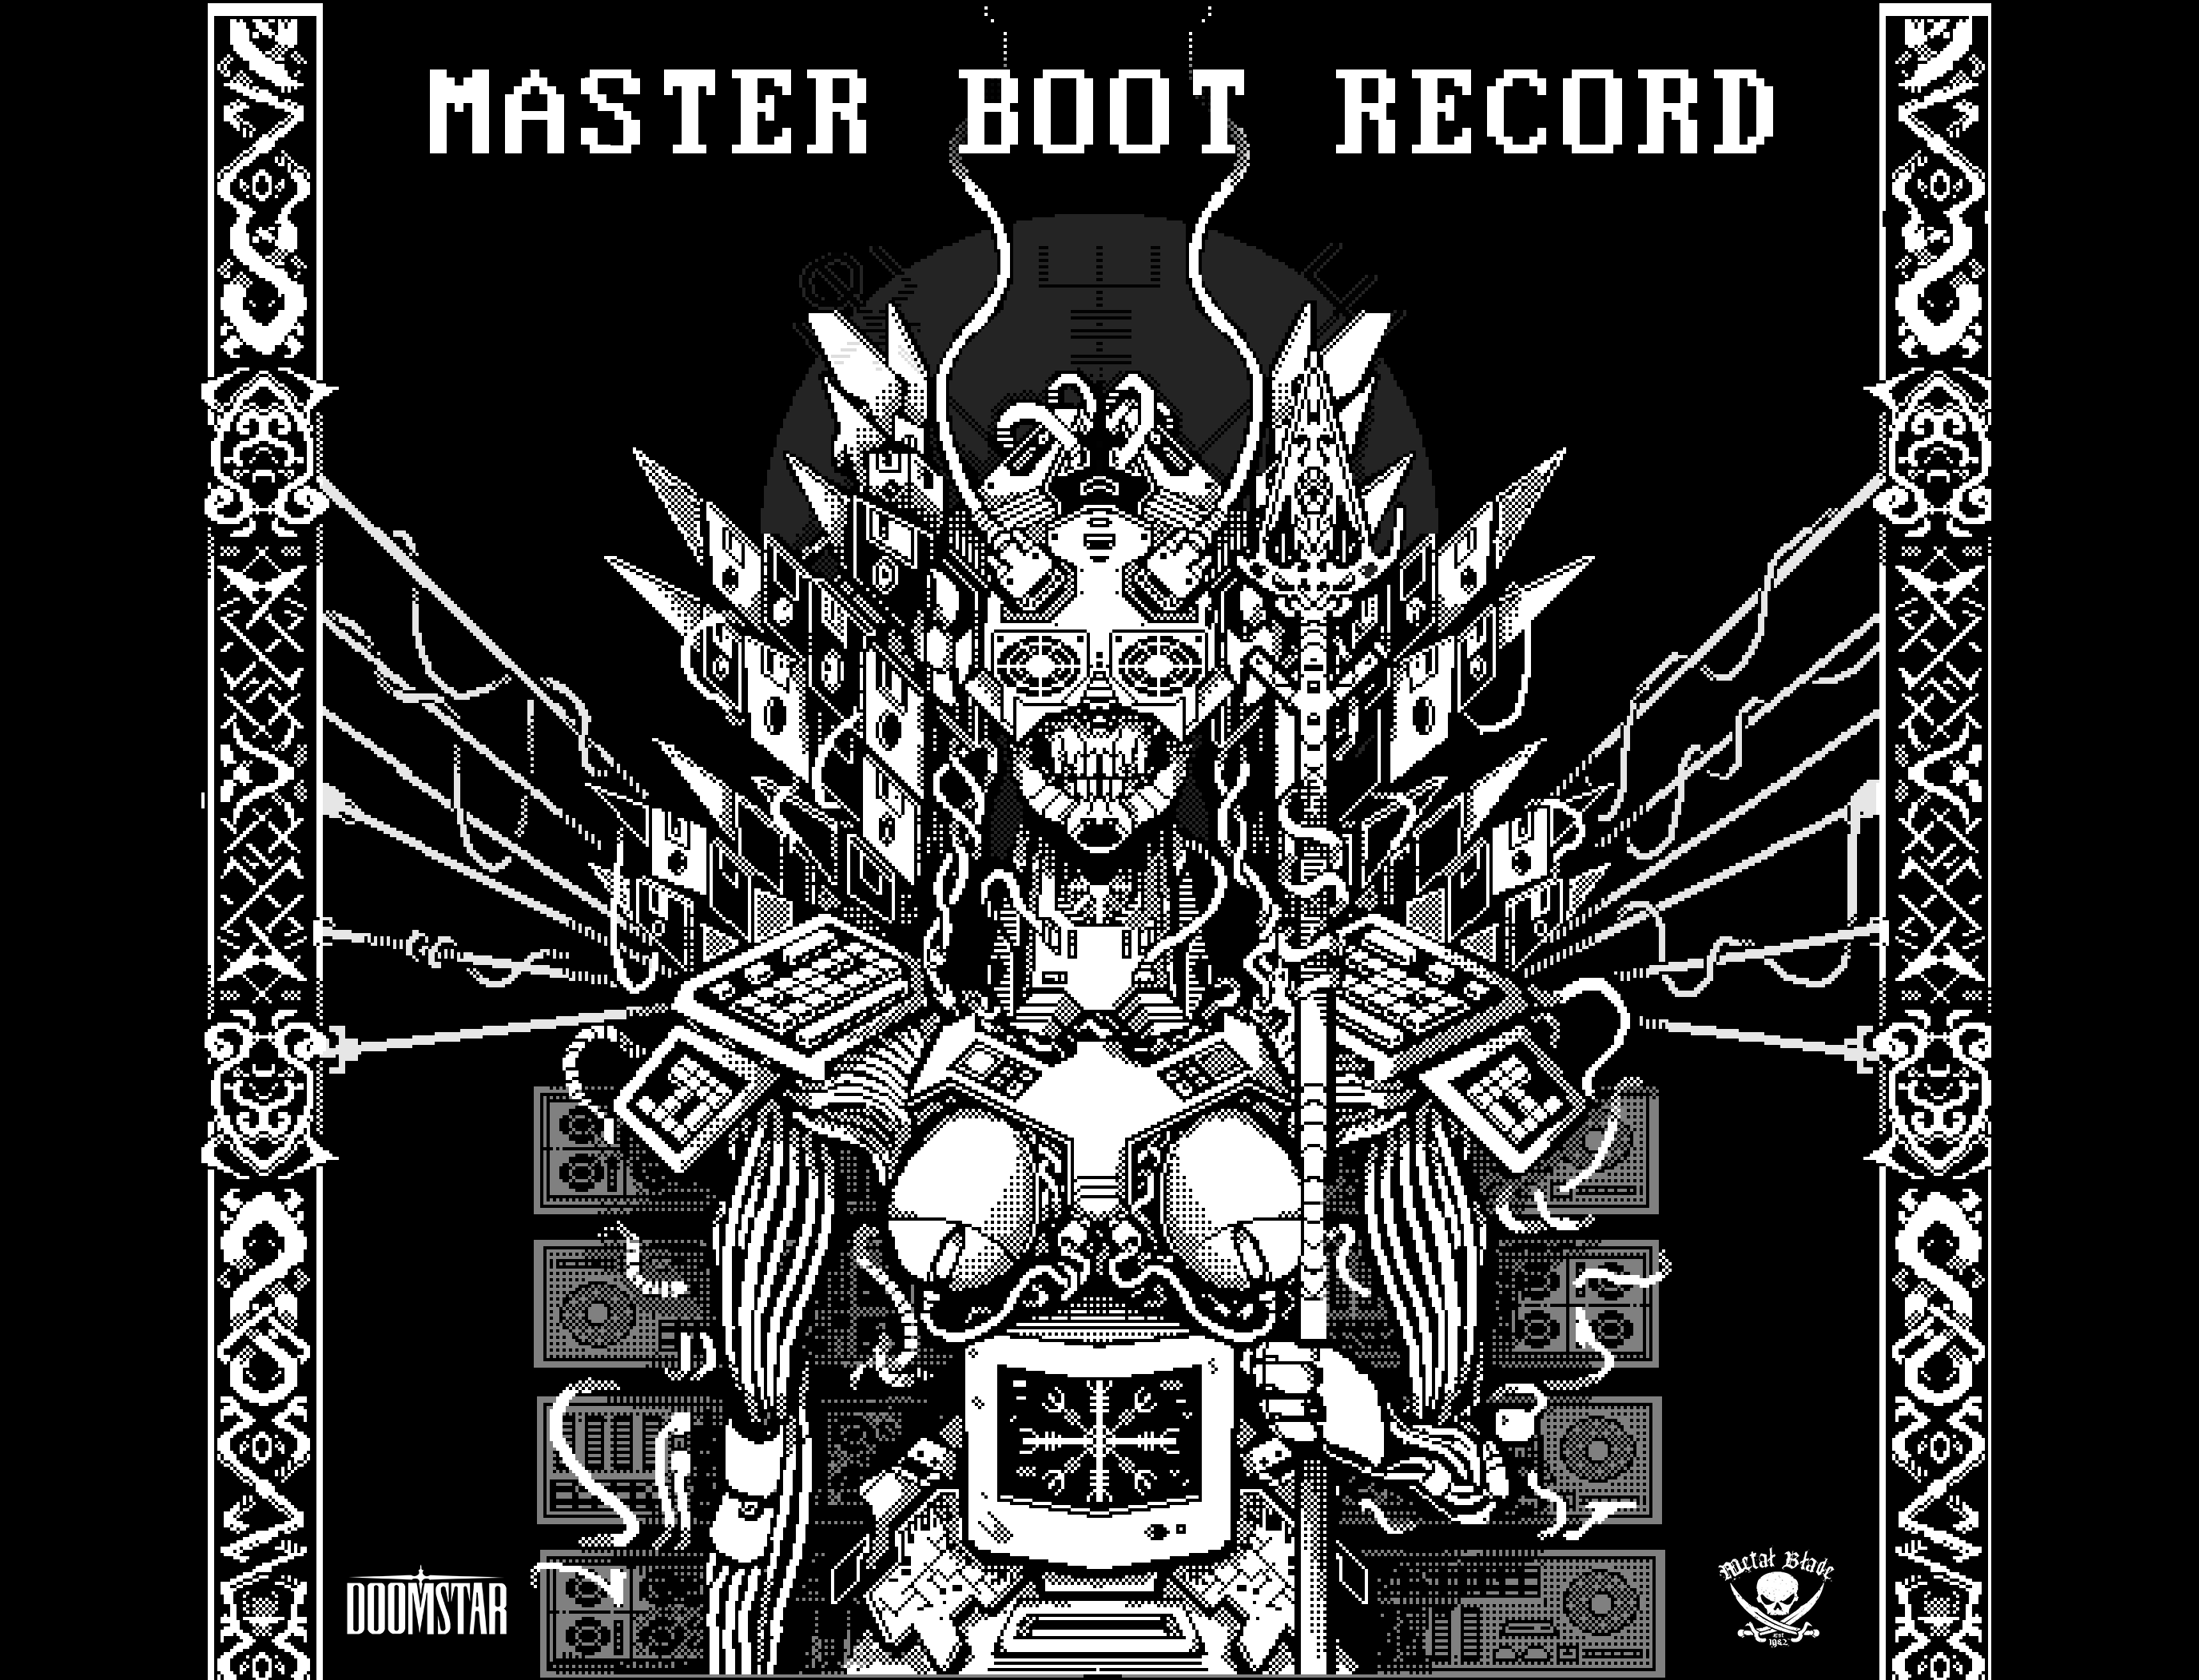 Master Boot Record, biproduct